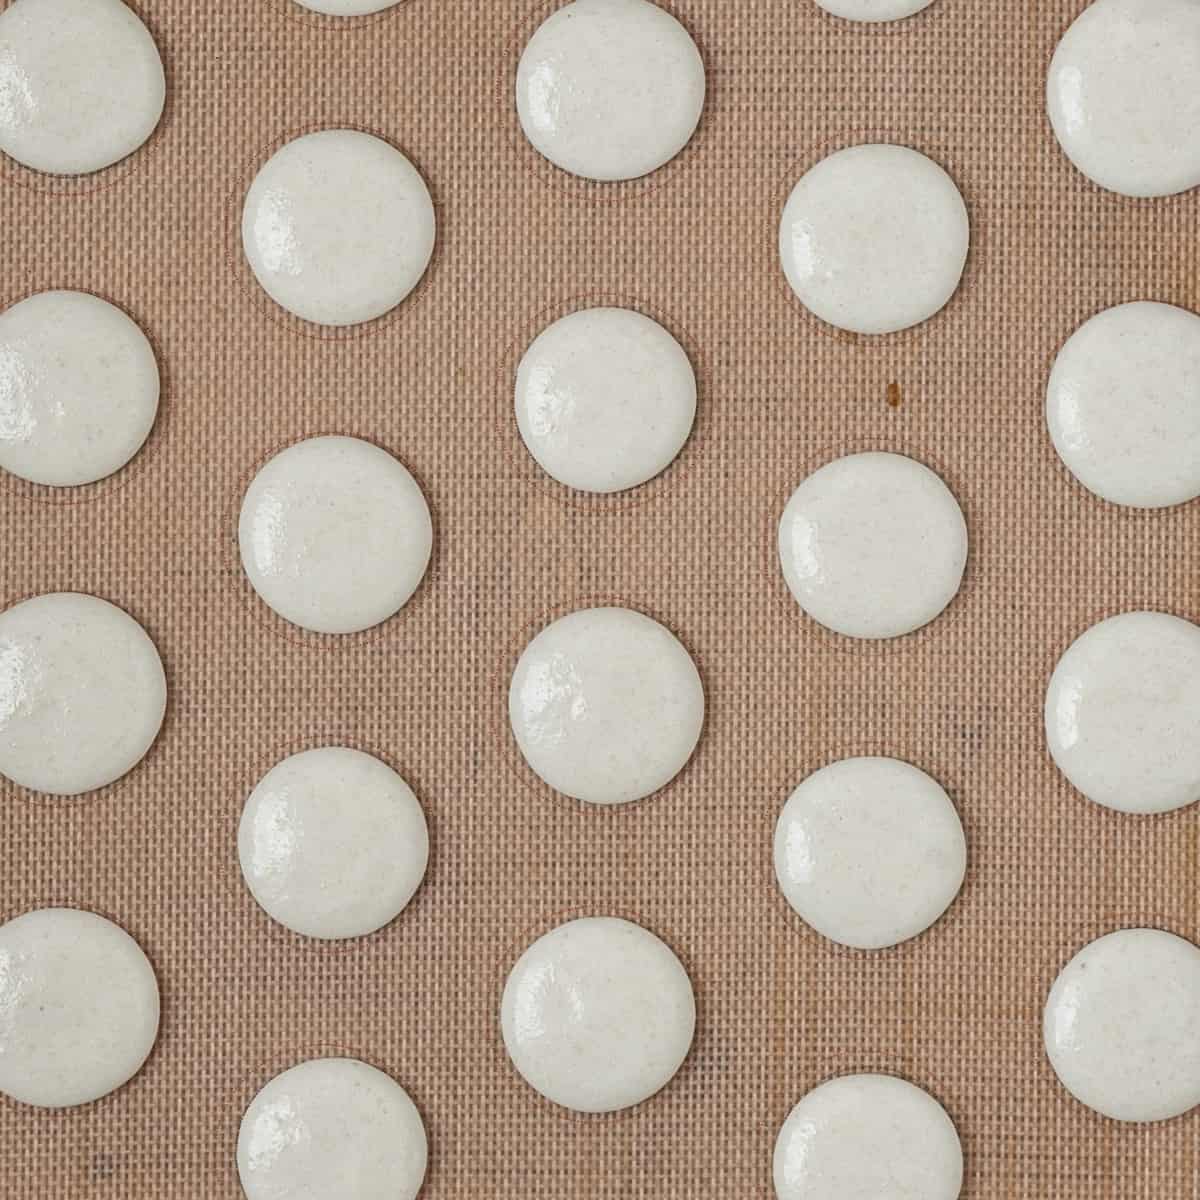 the macarons piped onto a baking mat before being baked.